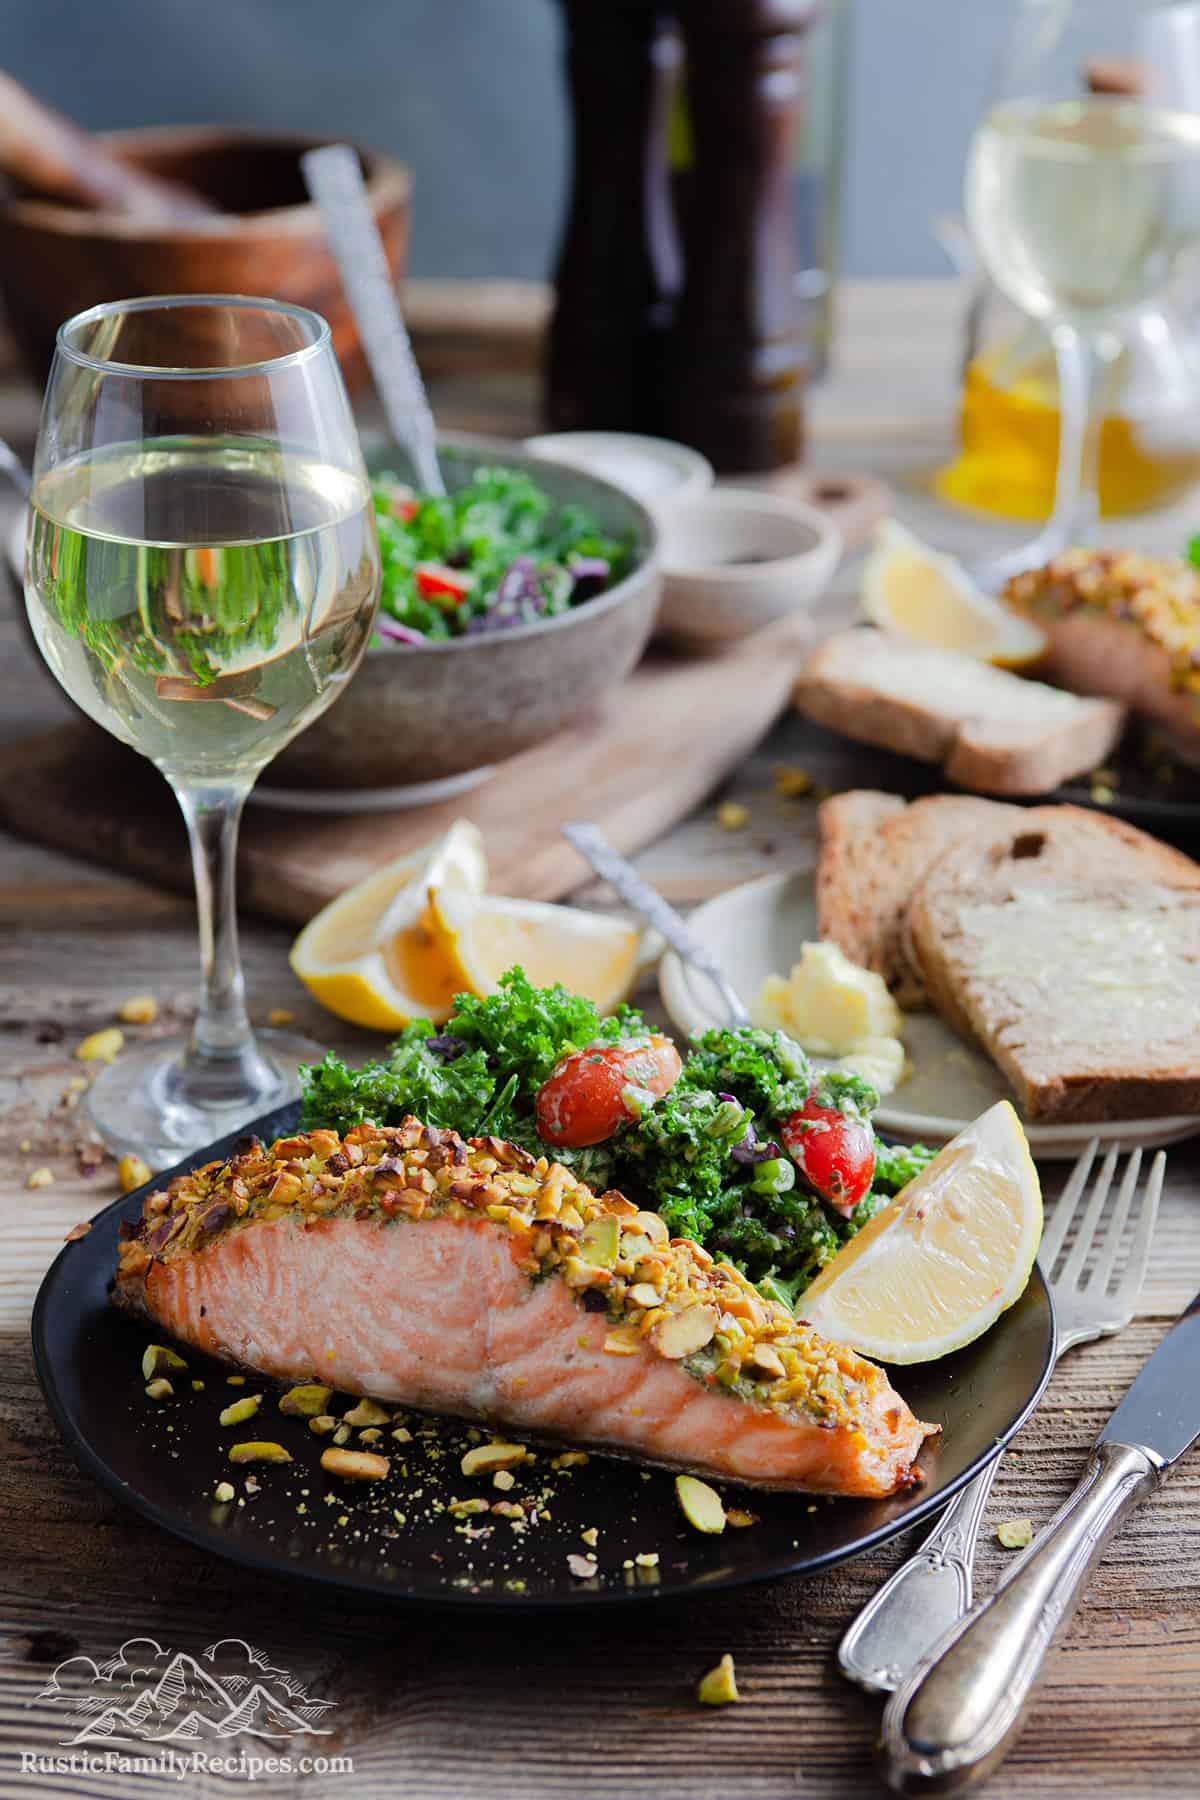 Pistachio crusted salmon on a plate with salad